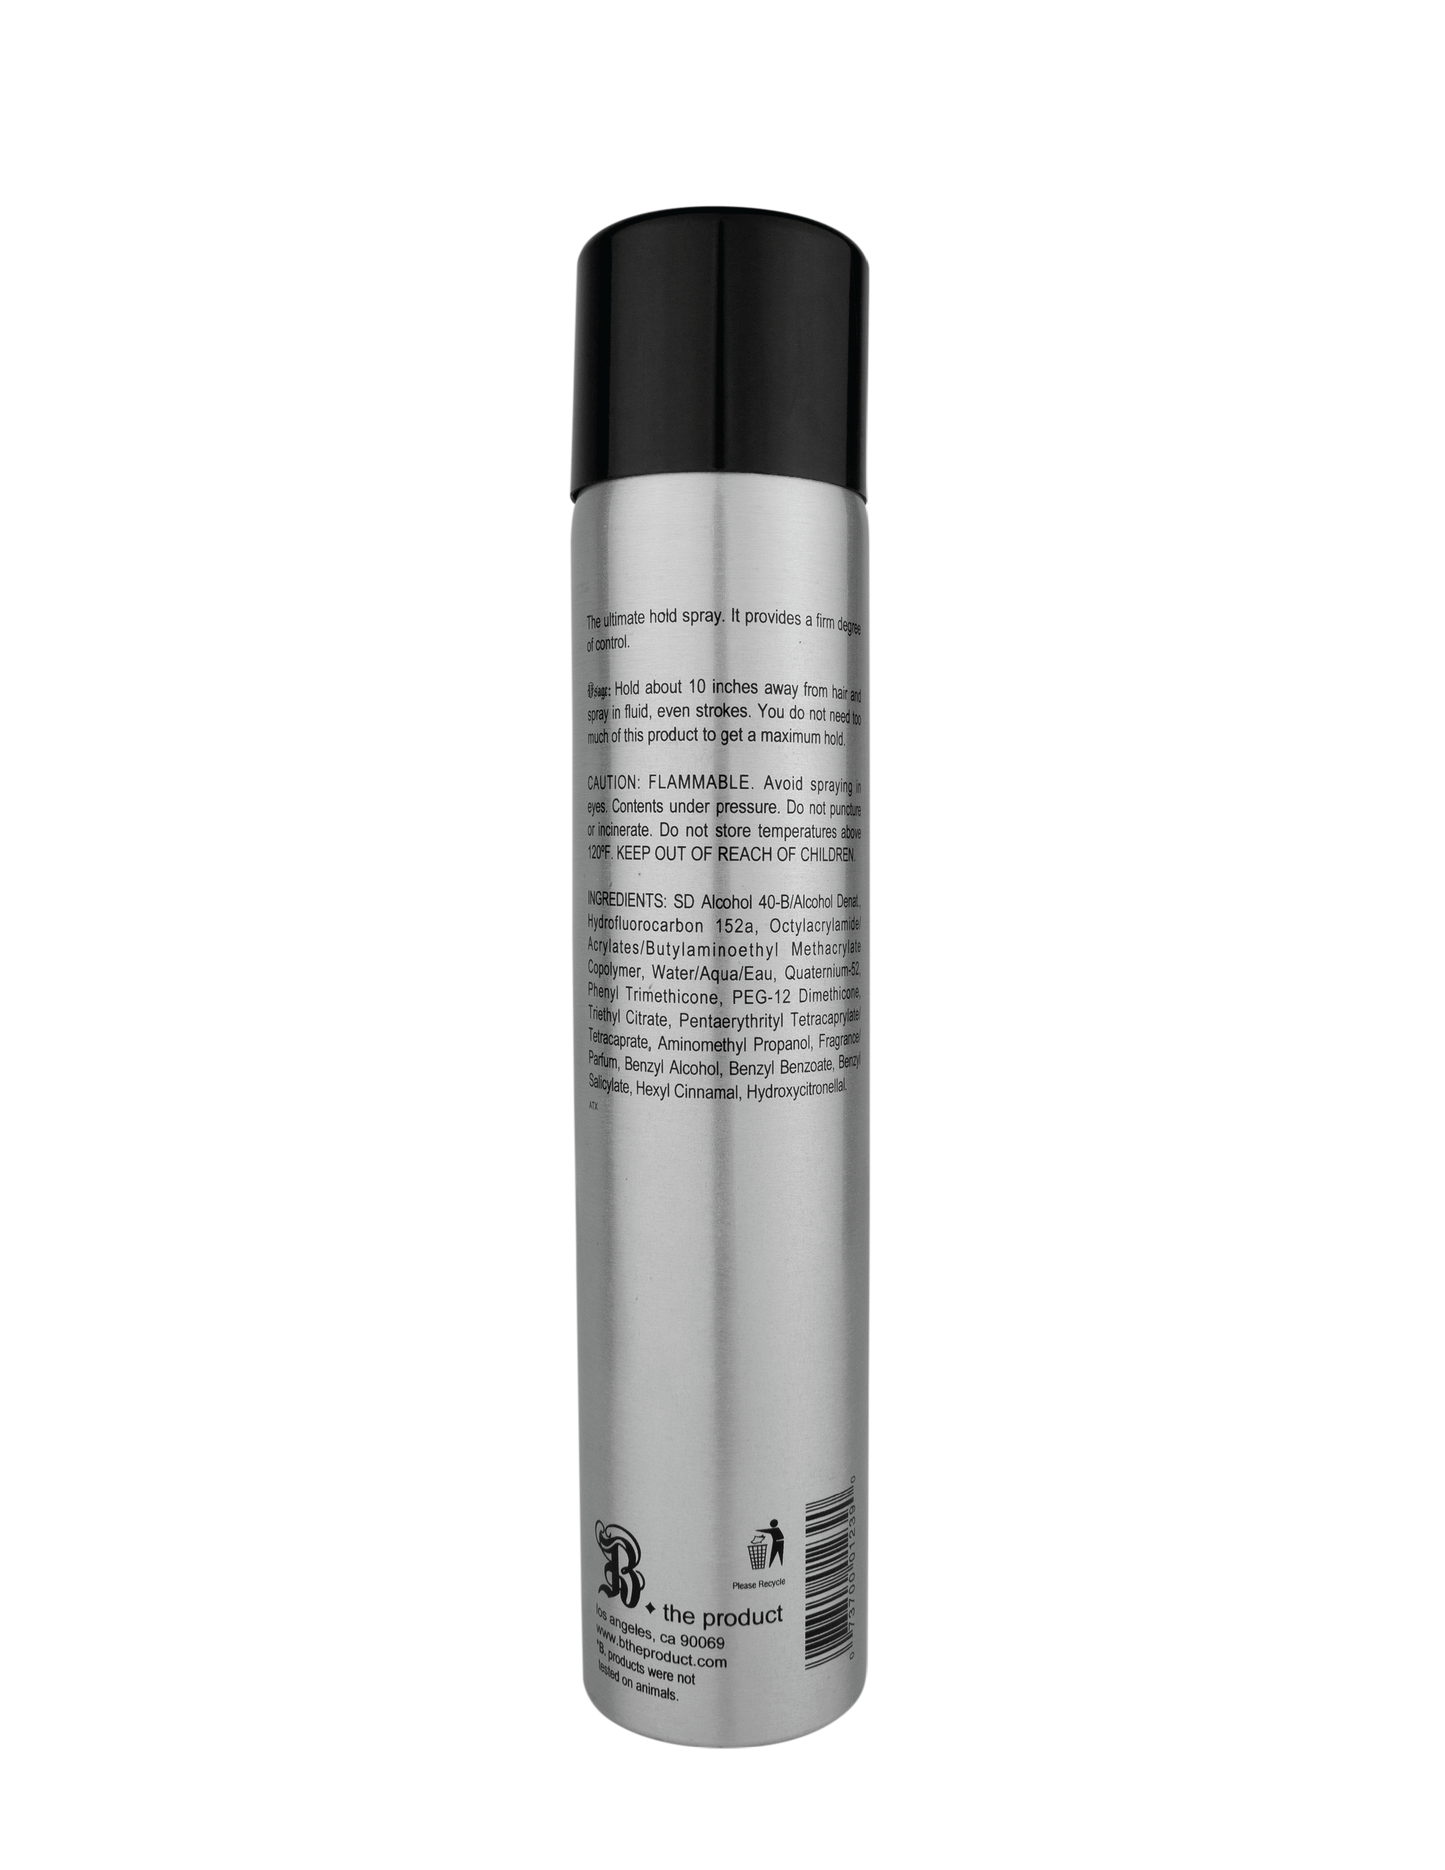 Spray Harder, Firm Hold Hairspray For Volume & Shine, Thermal Protector B. The Product